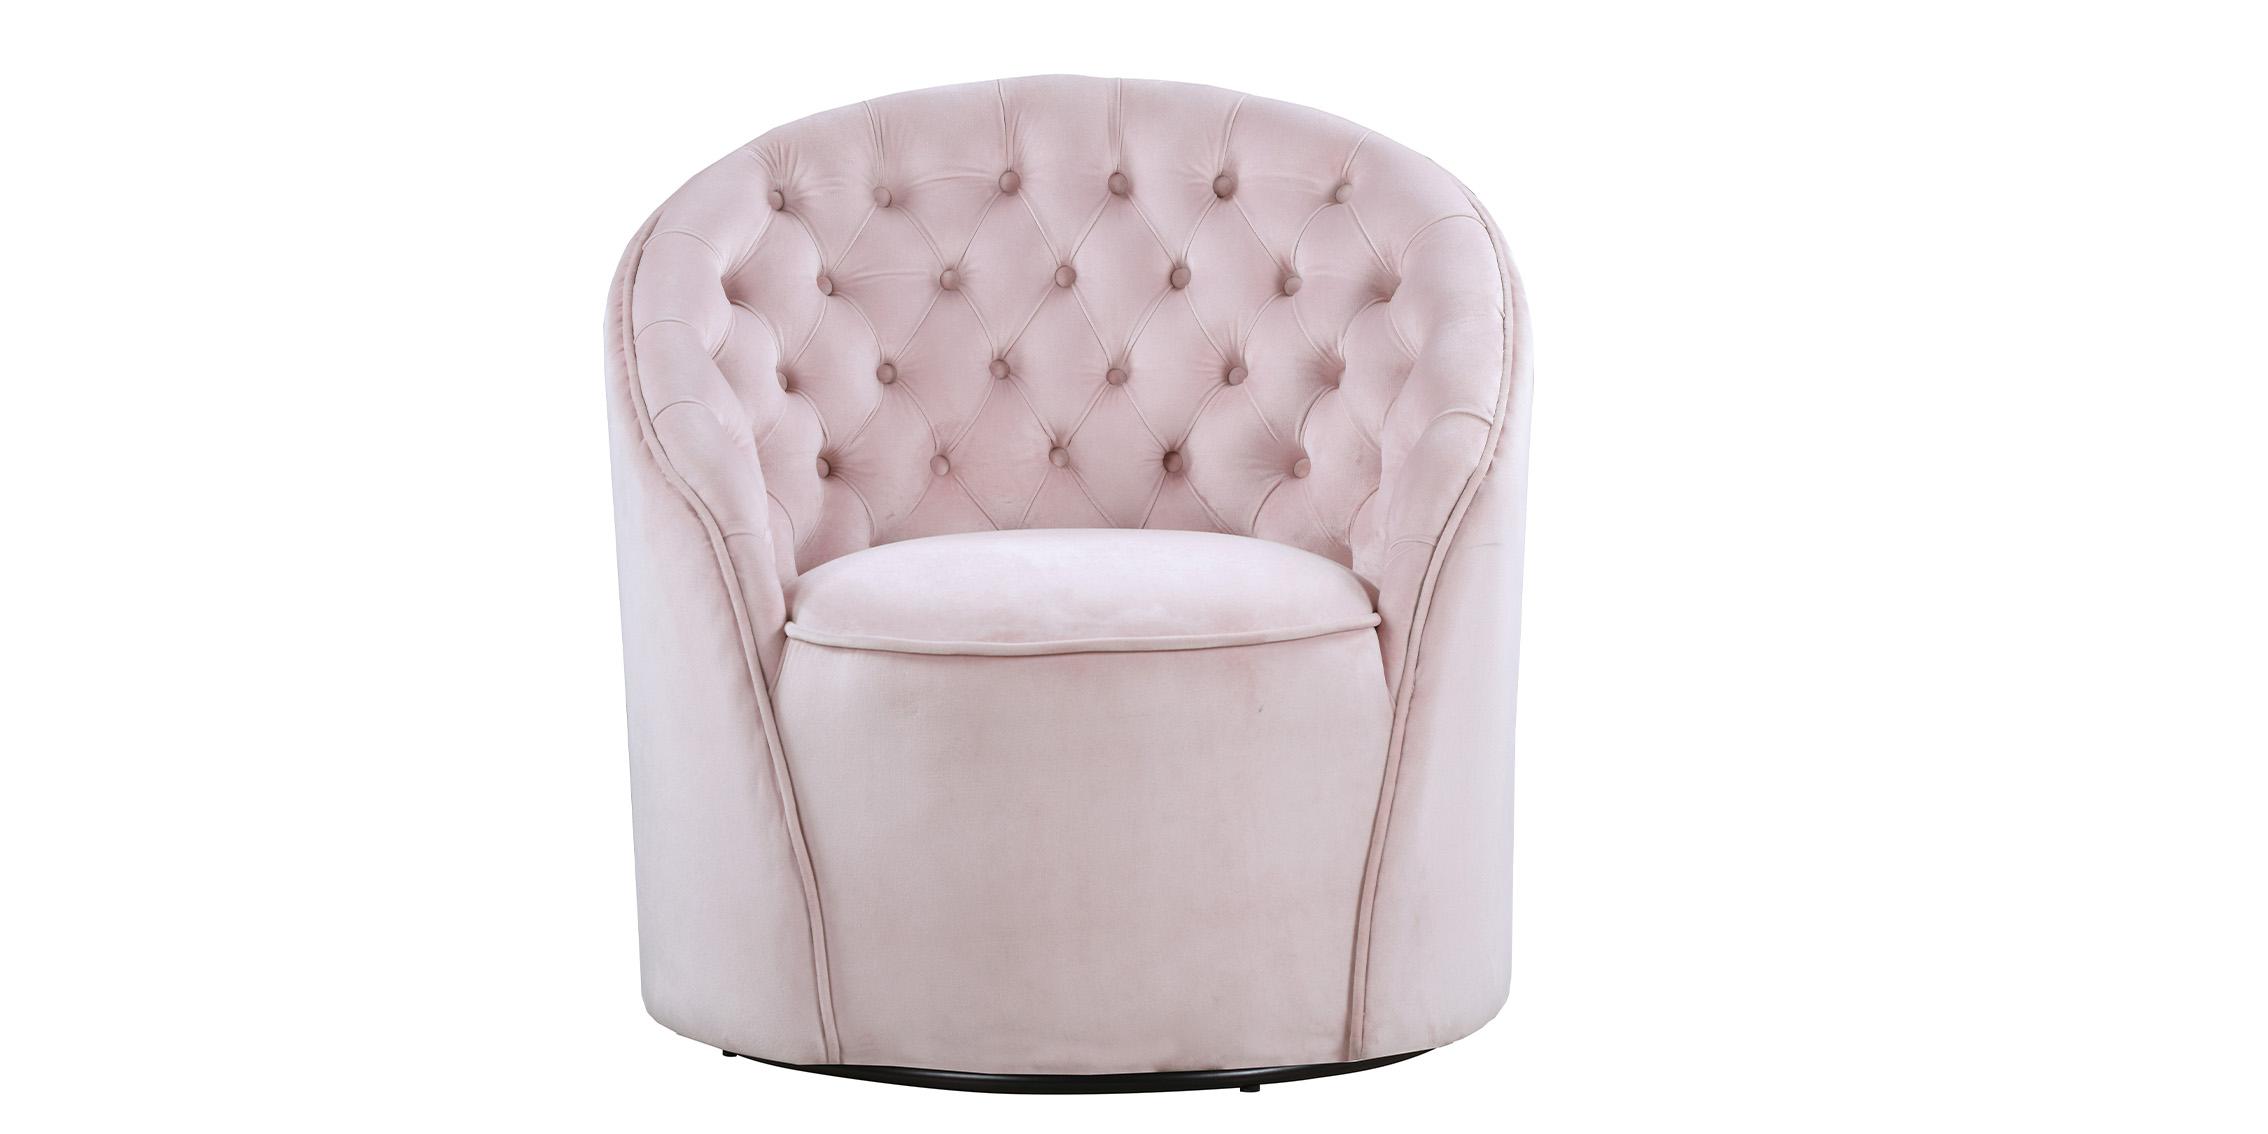 Contemporary, Modern Accent Chair ALESSIO 501Pink 501Pink in Pink Velvet